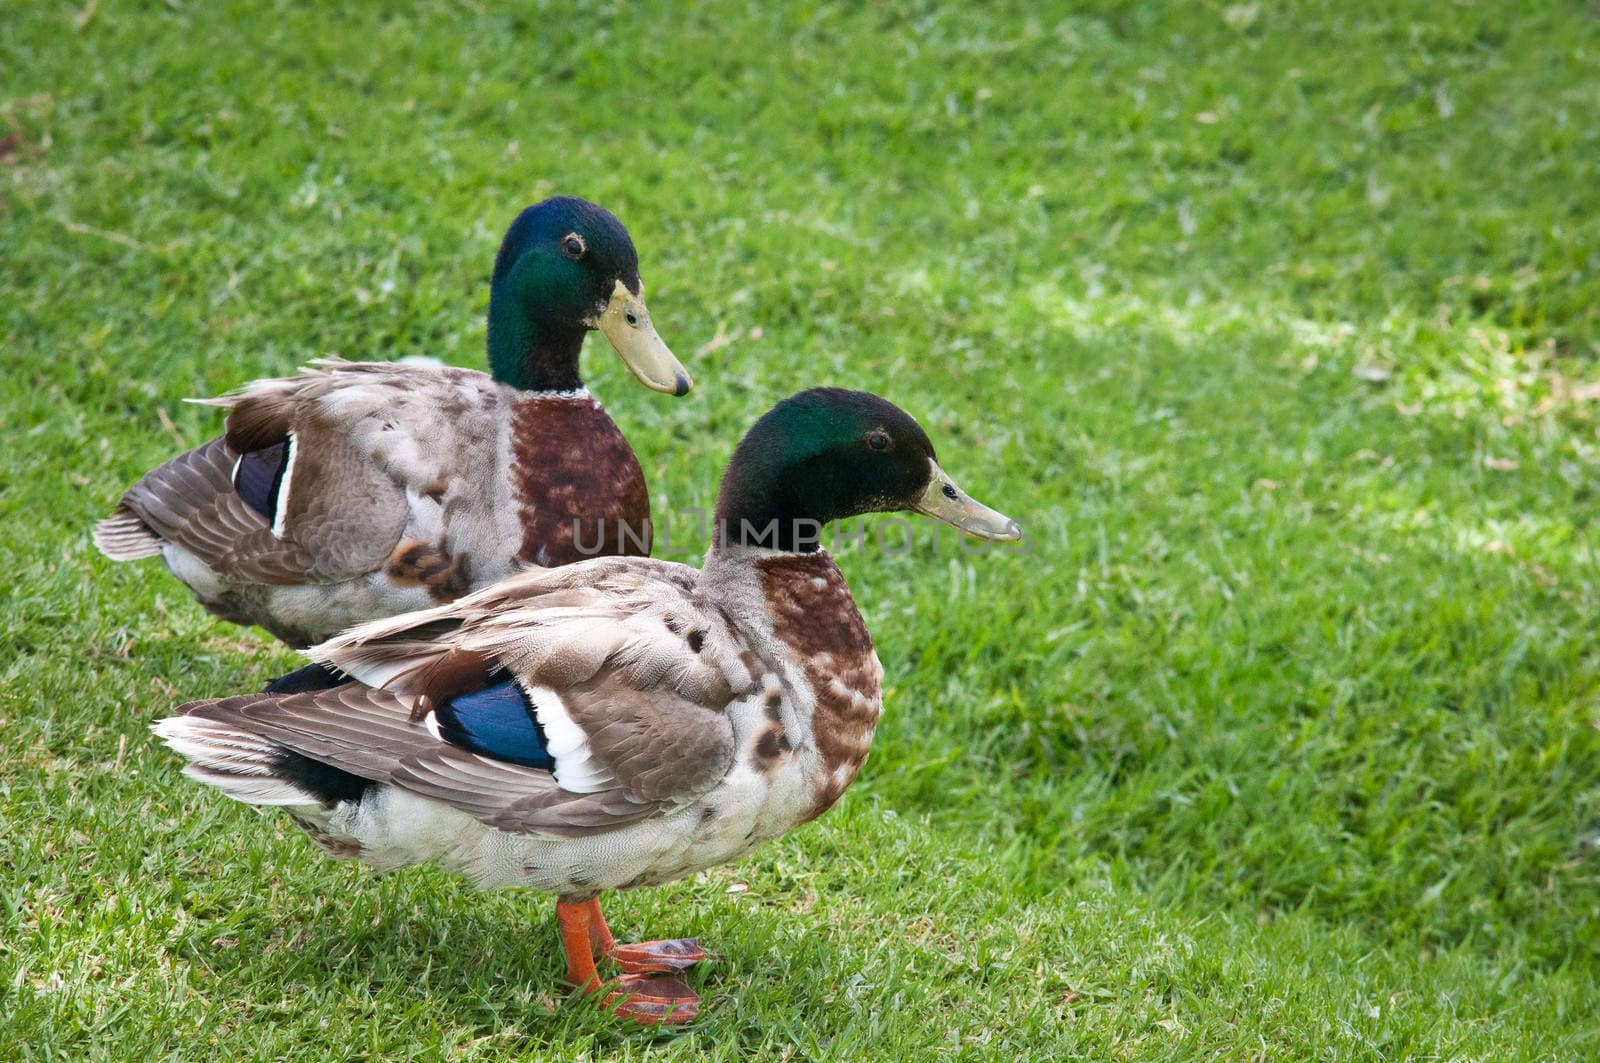 Ducks sitting on the grass . by LarisaP